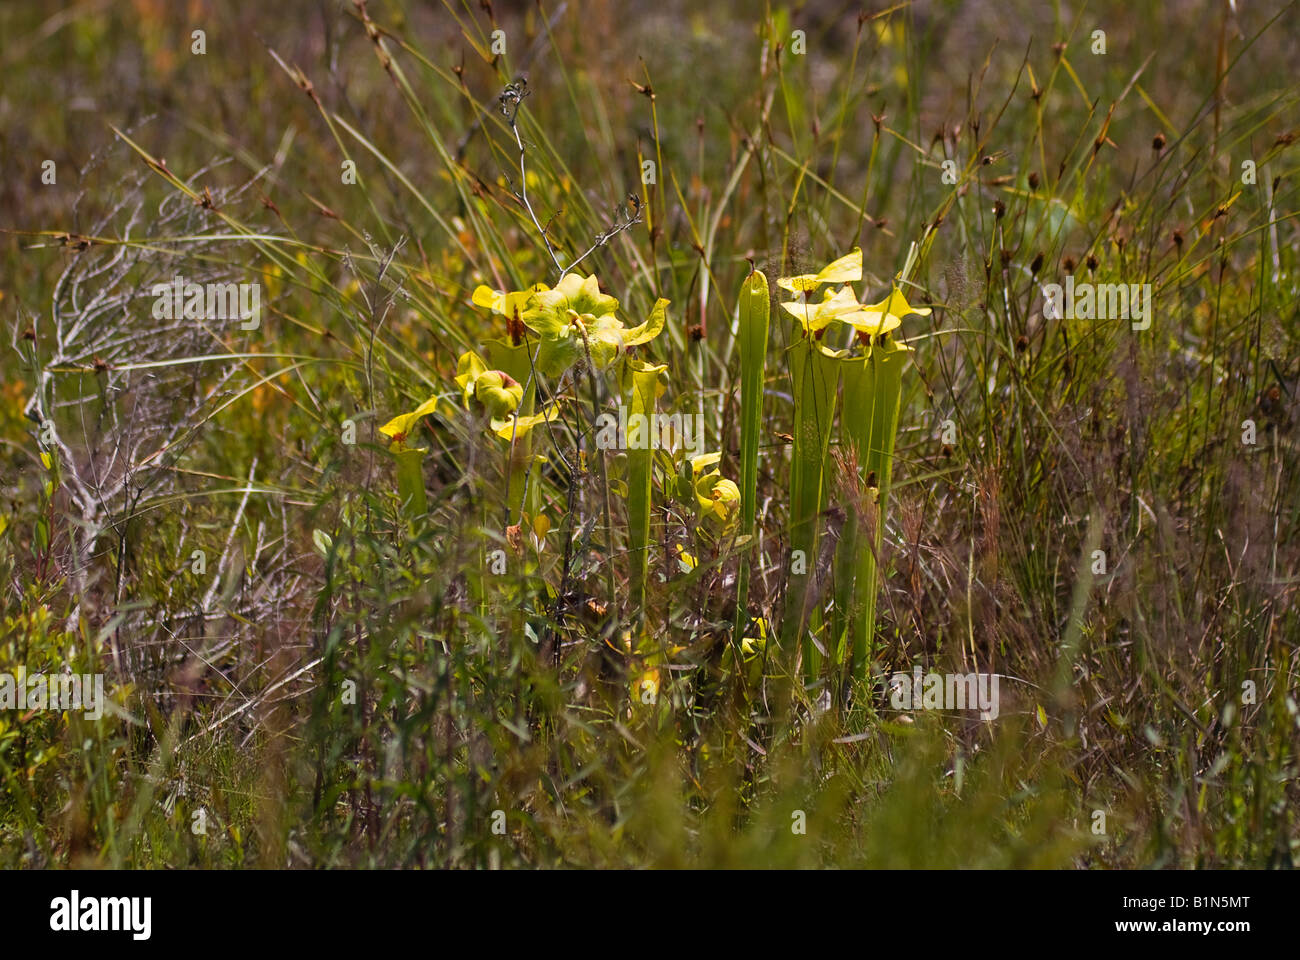 pitcher plants Sarracenia flava at Tates Hell State Forest Florida Stock Photo